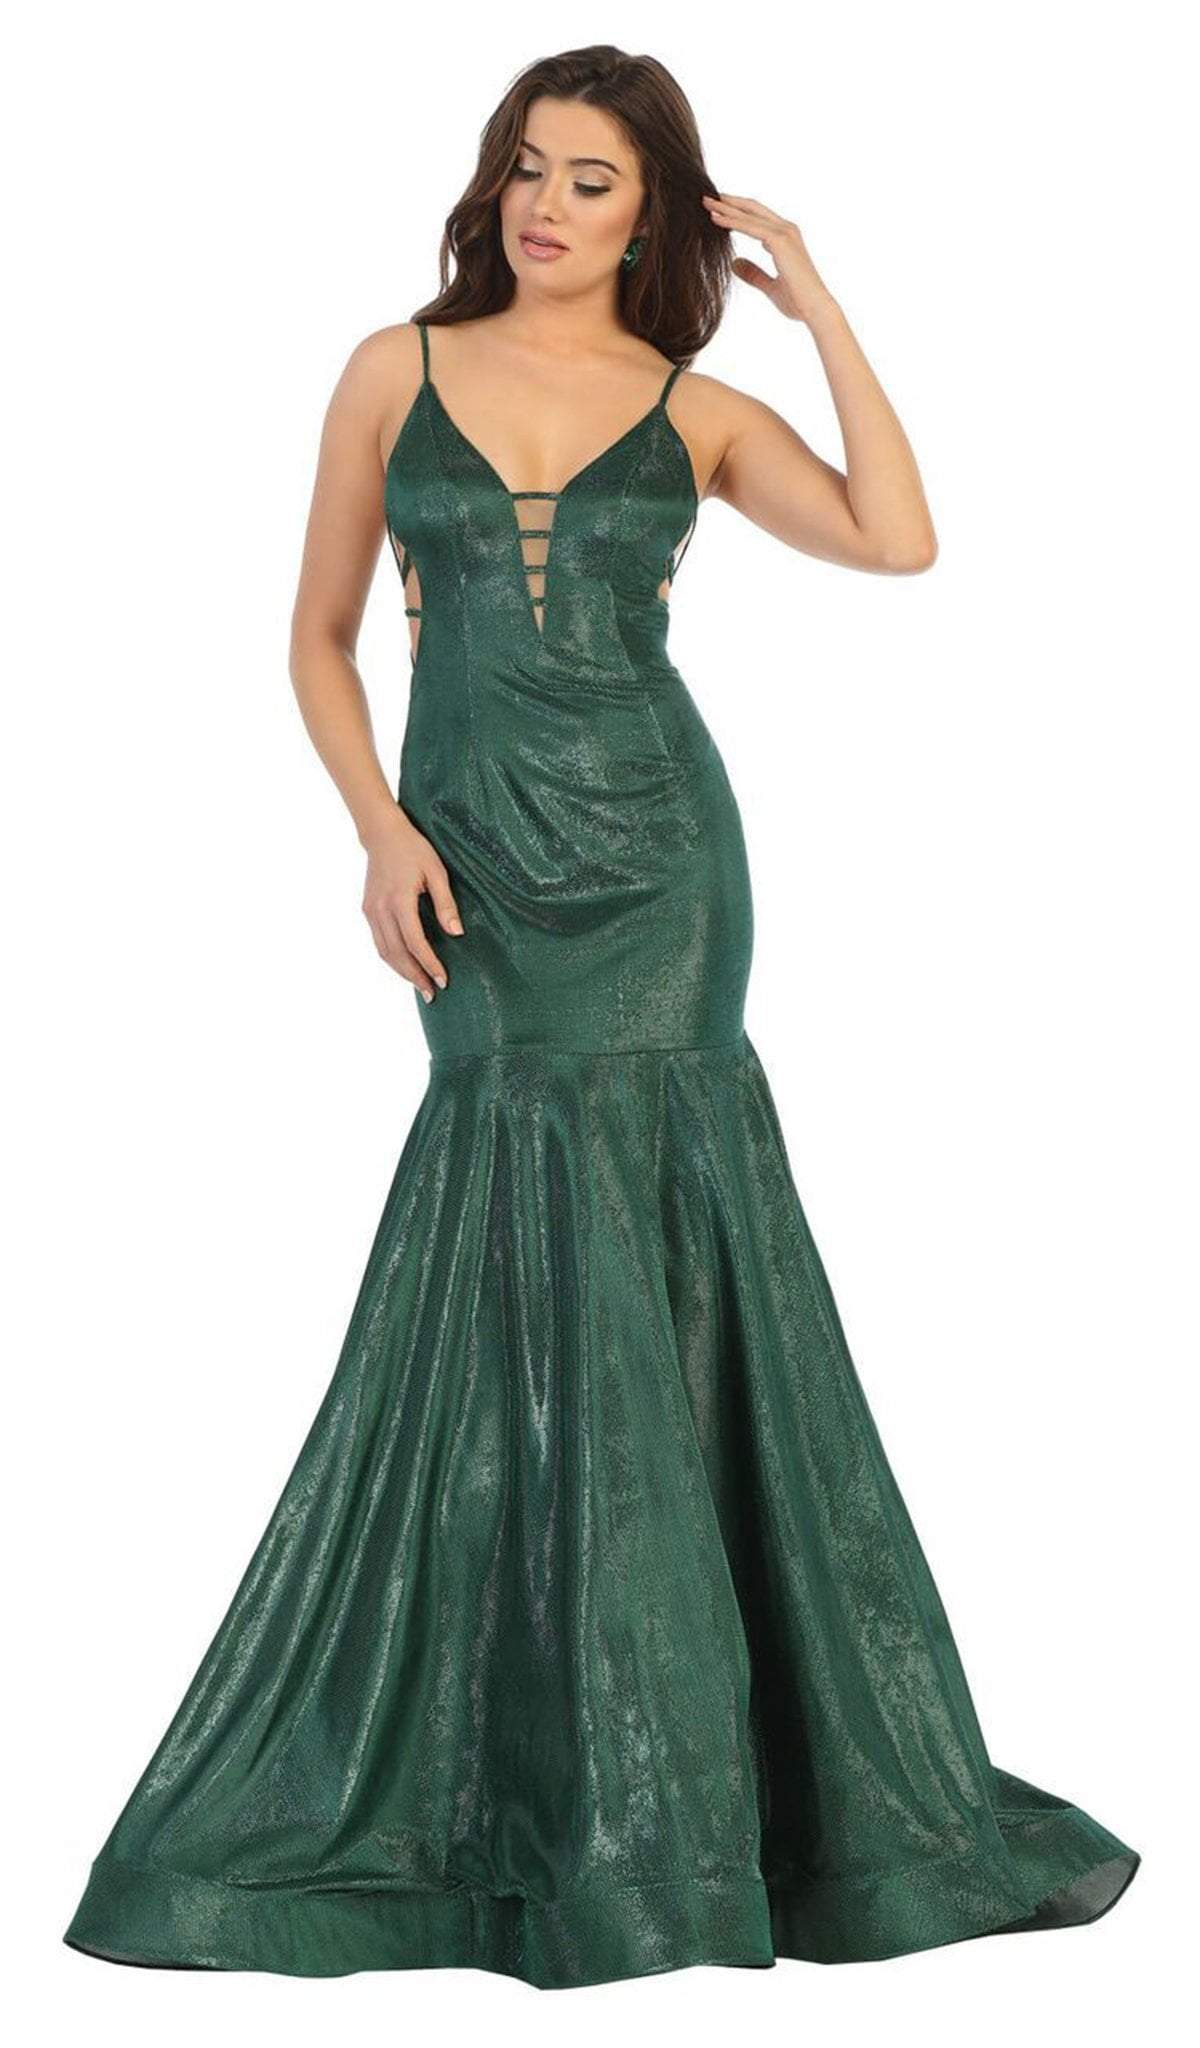 May Queen - RQ7739 Strappy Plunging V-Neck Trumpet Dress In Green